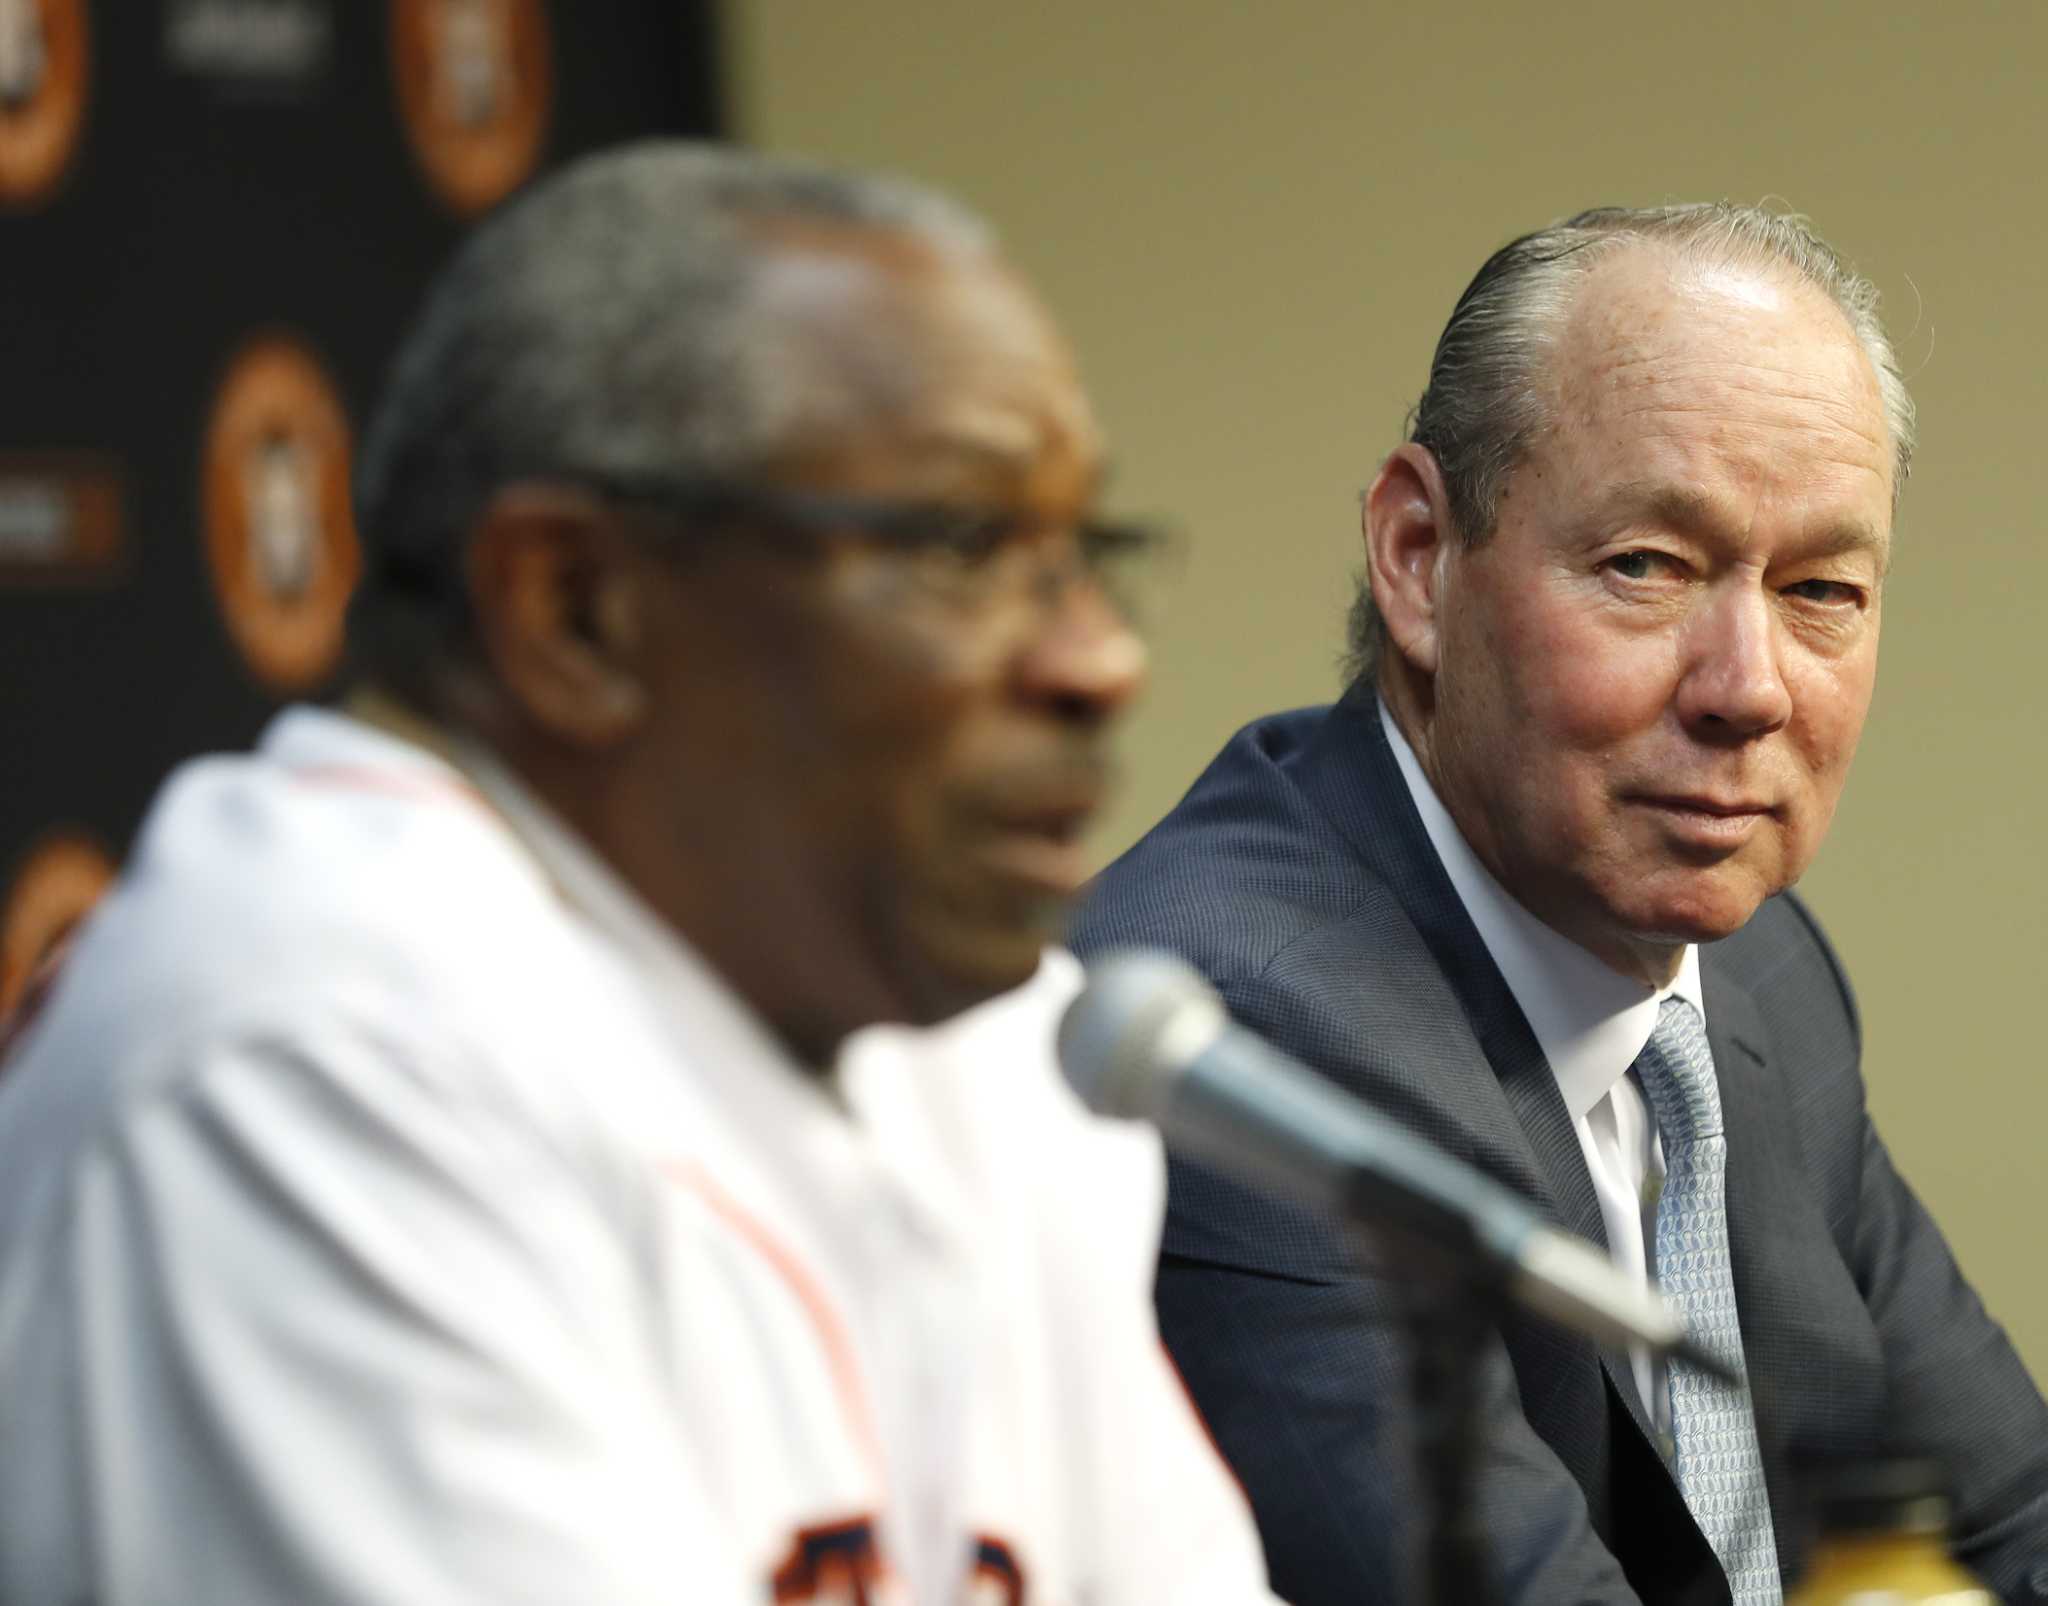 Houston Astros owner Jim Crane expects to hire new manager by Feb. 3